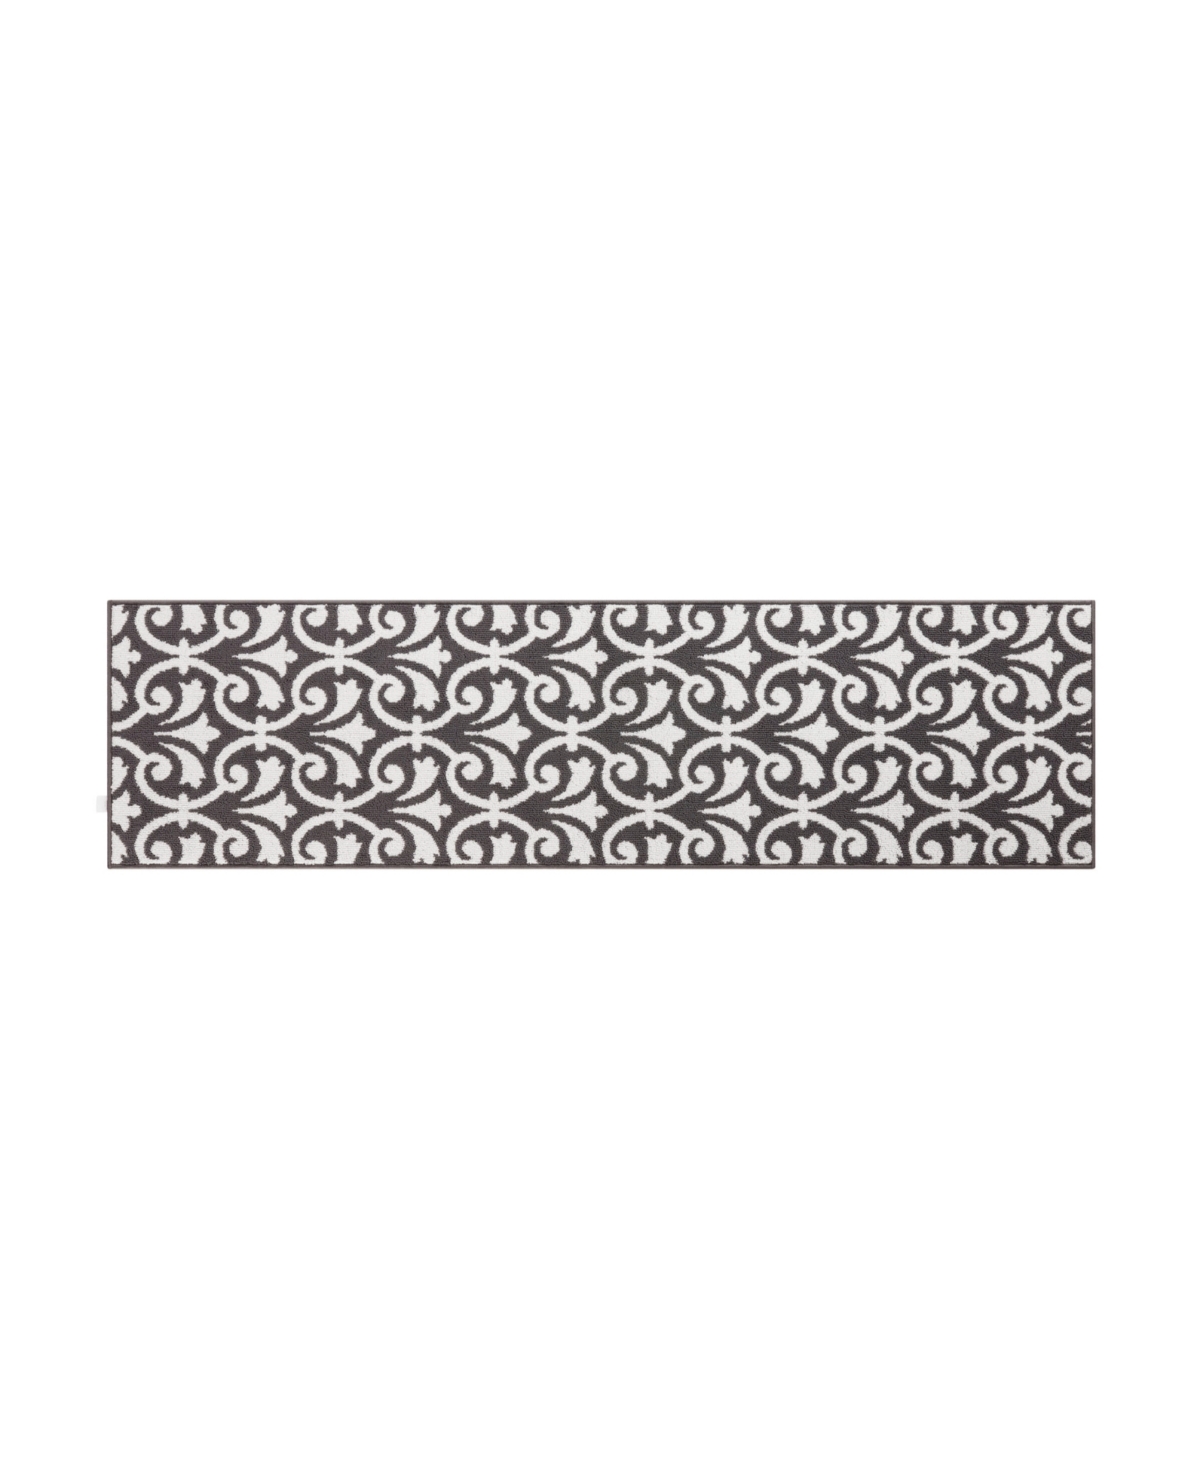 Jean Pierre Karb Floral Scroll Tufted- Machine Washable Runner Rug, 26" X 72" In Dark Gray And White